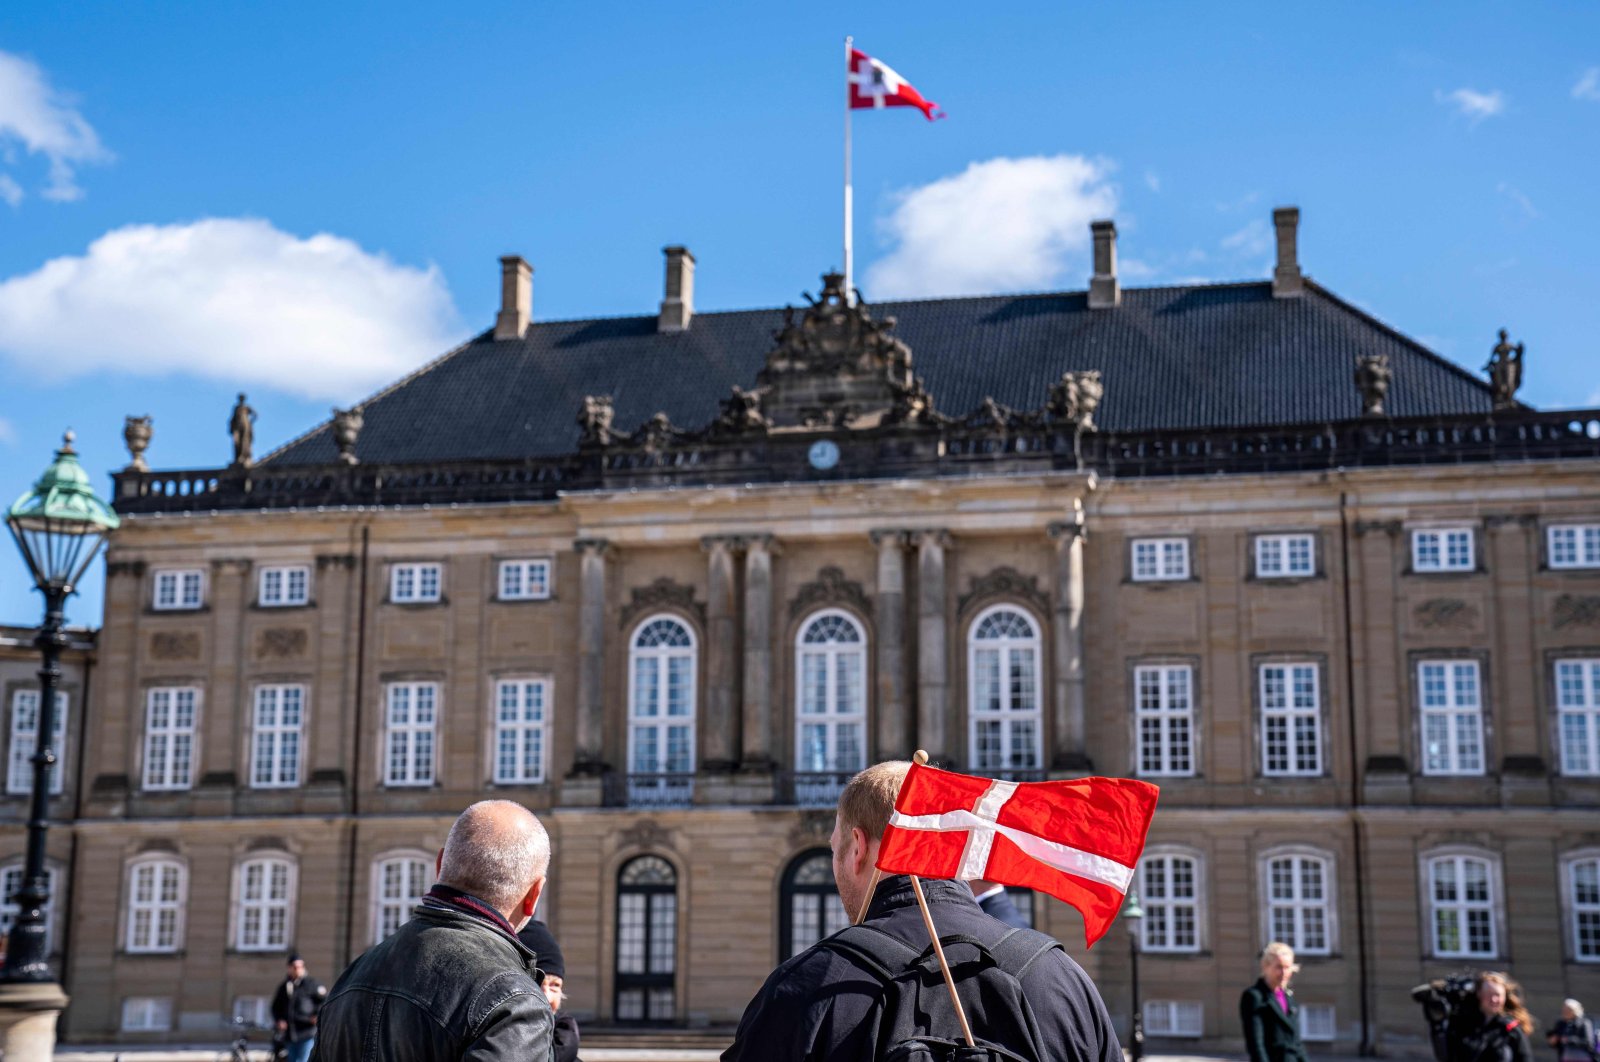 People are seen at Amalienborg Palace Square to mark the birthday of Danish Queen Margrethe in Copenhagen on April 16, 2020. (AFP Photo)